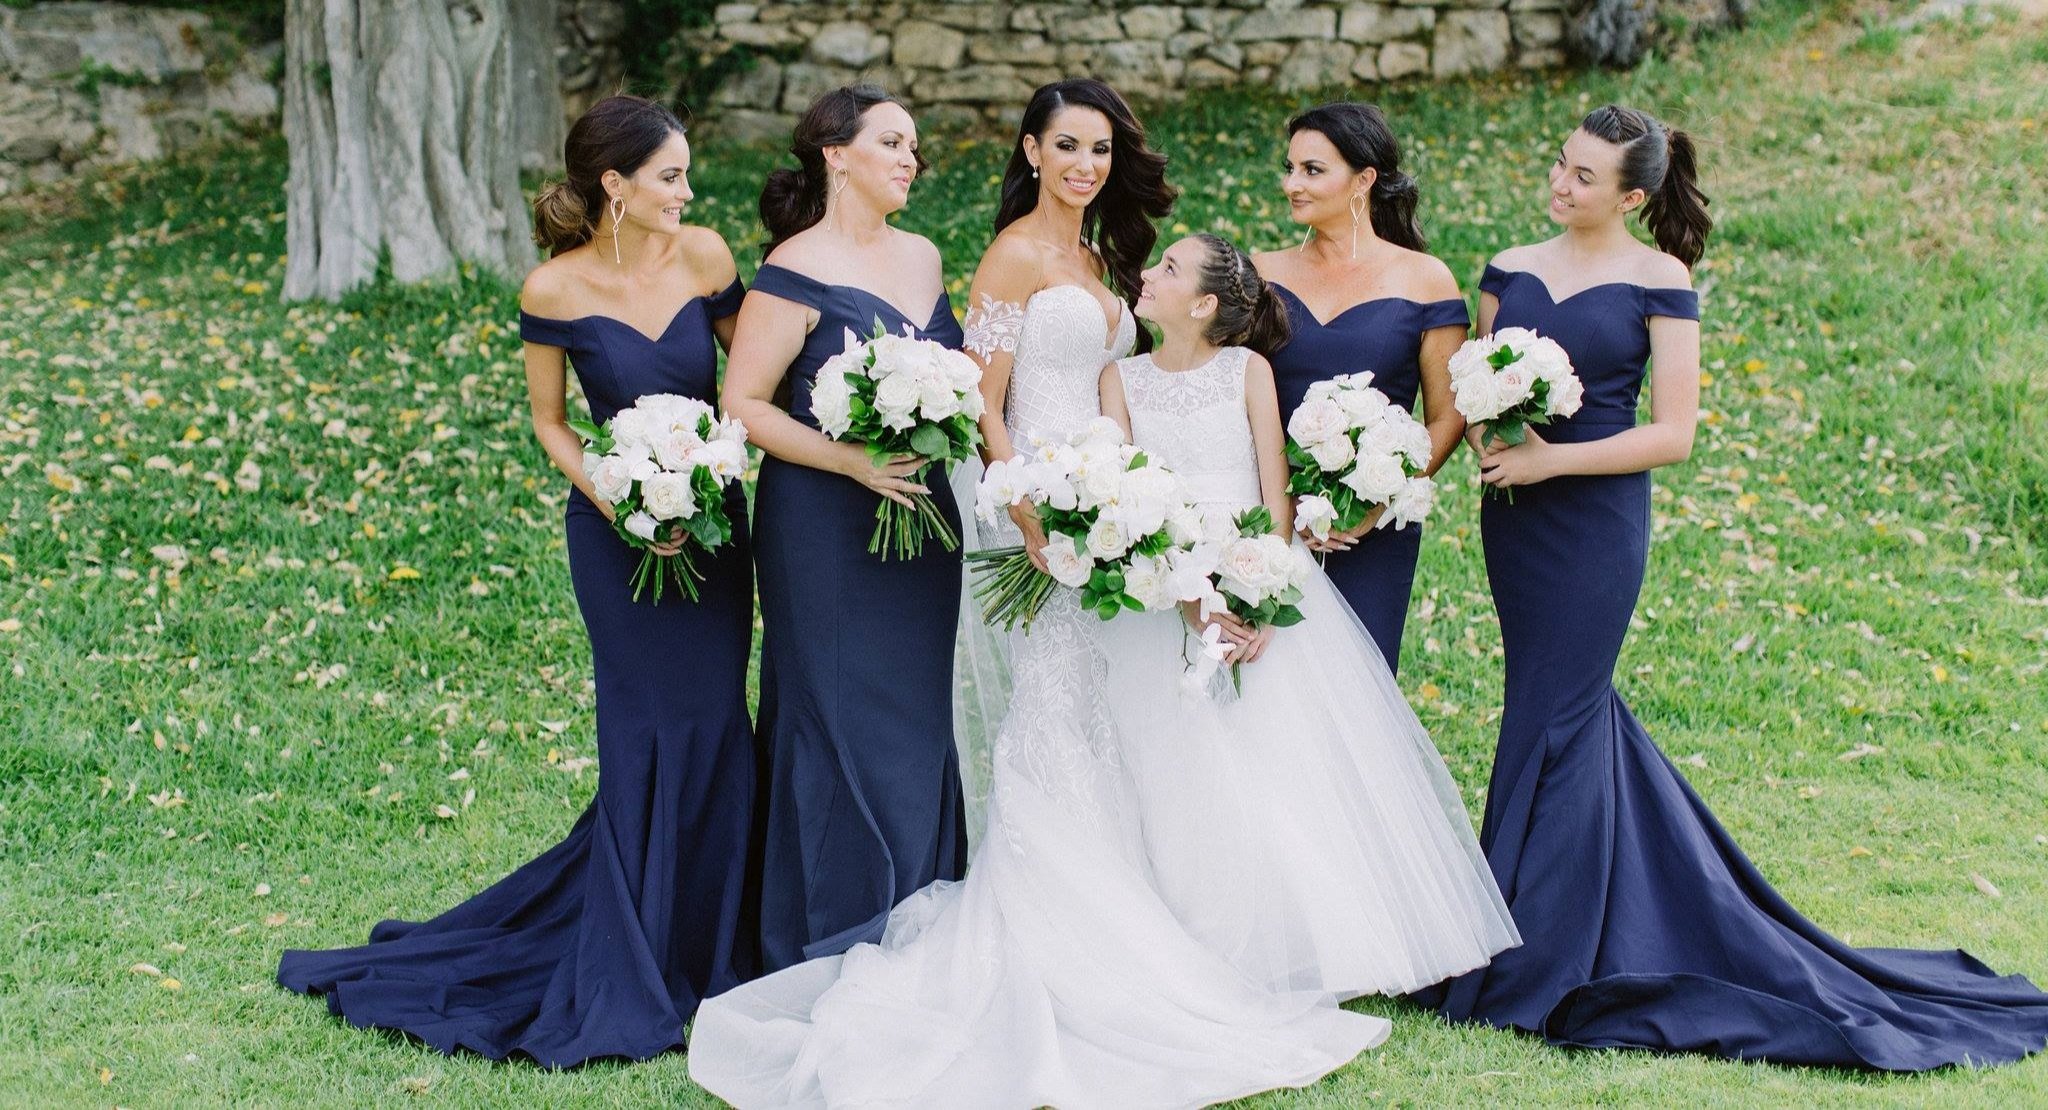 Bridal Party Selections - Today's Weddings